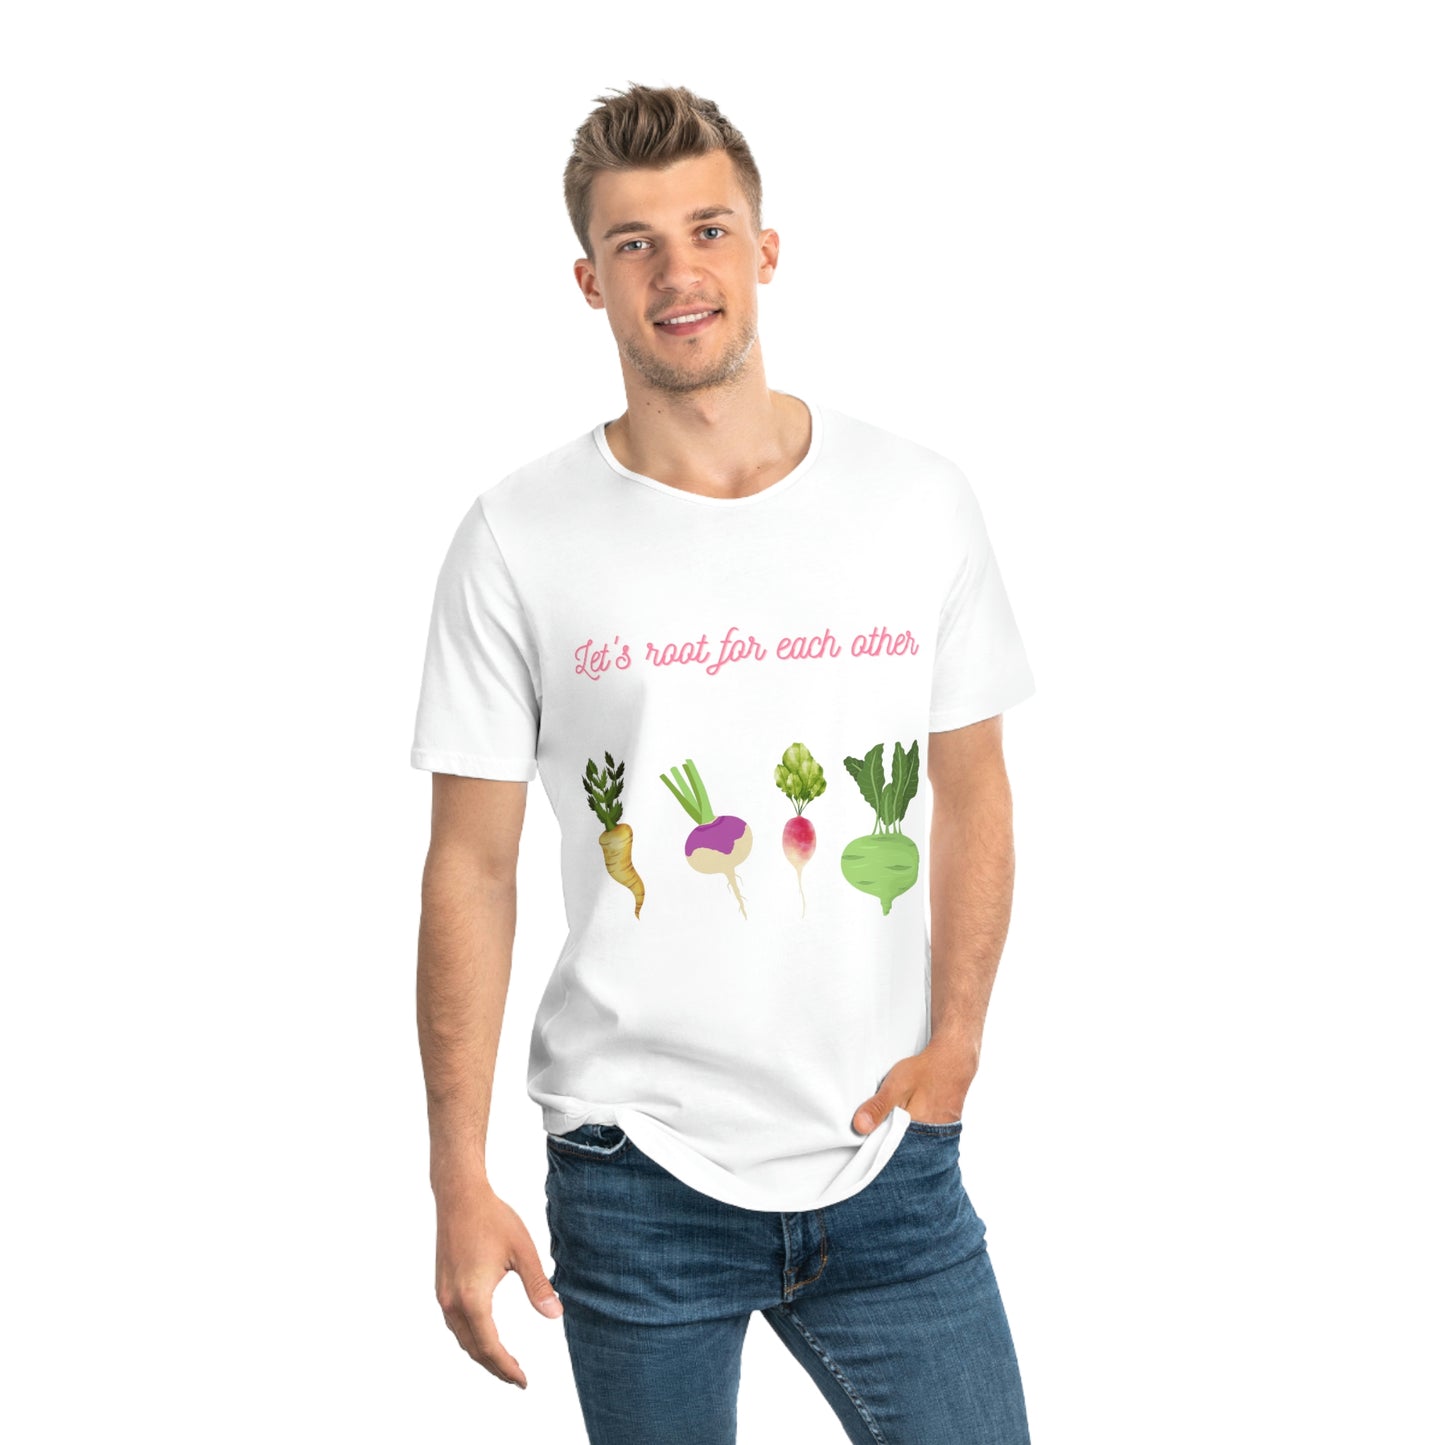 A Roots Shirt Unleash Your Green Thumb and Show Your Support with Konaloo's 'Let's Root for Each Other' Gardening T-Shirt - Available in Unisex Relaxed Jersey Design for Men and Women!